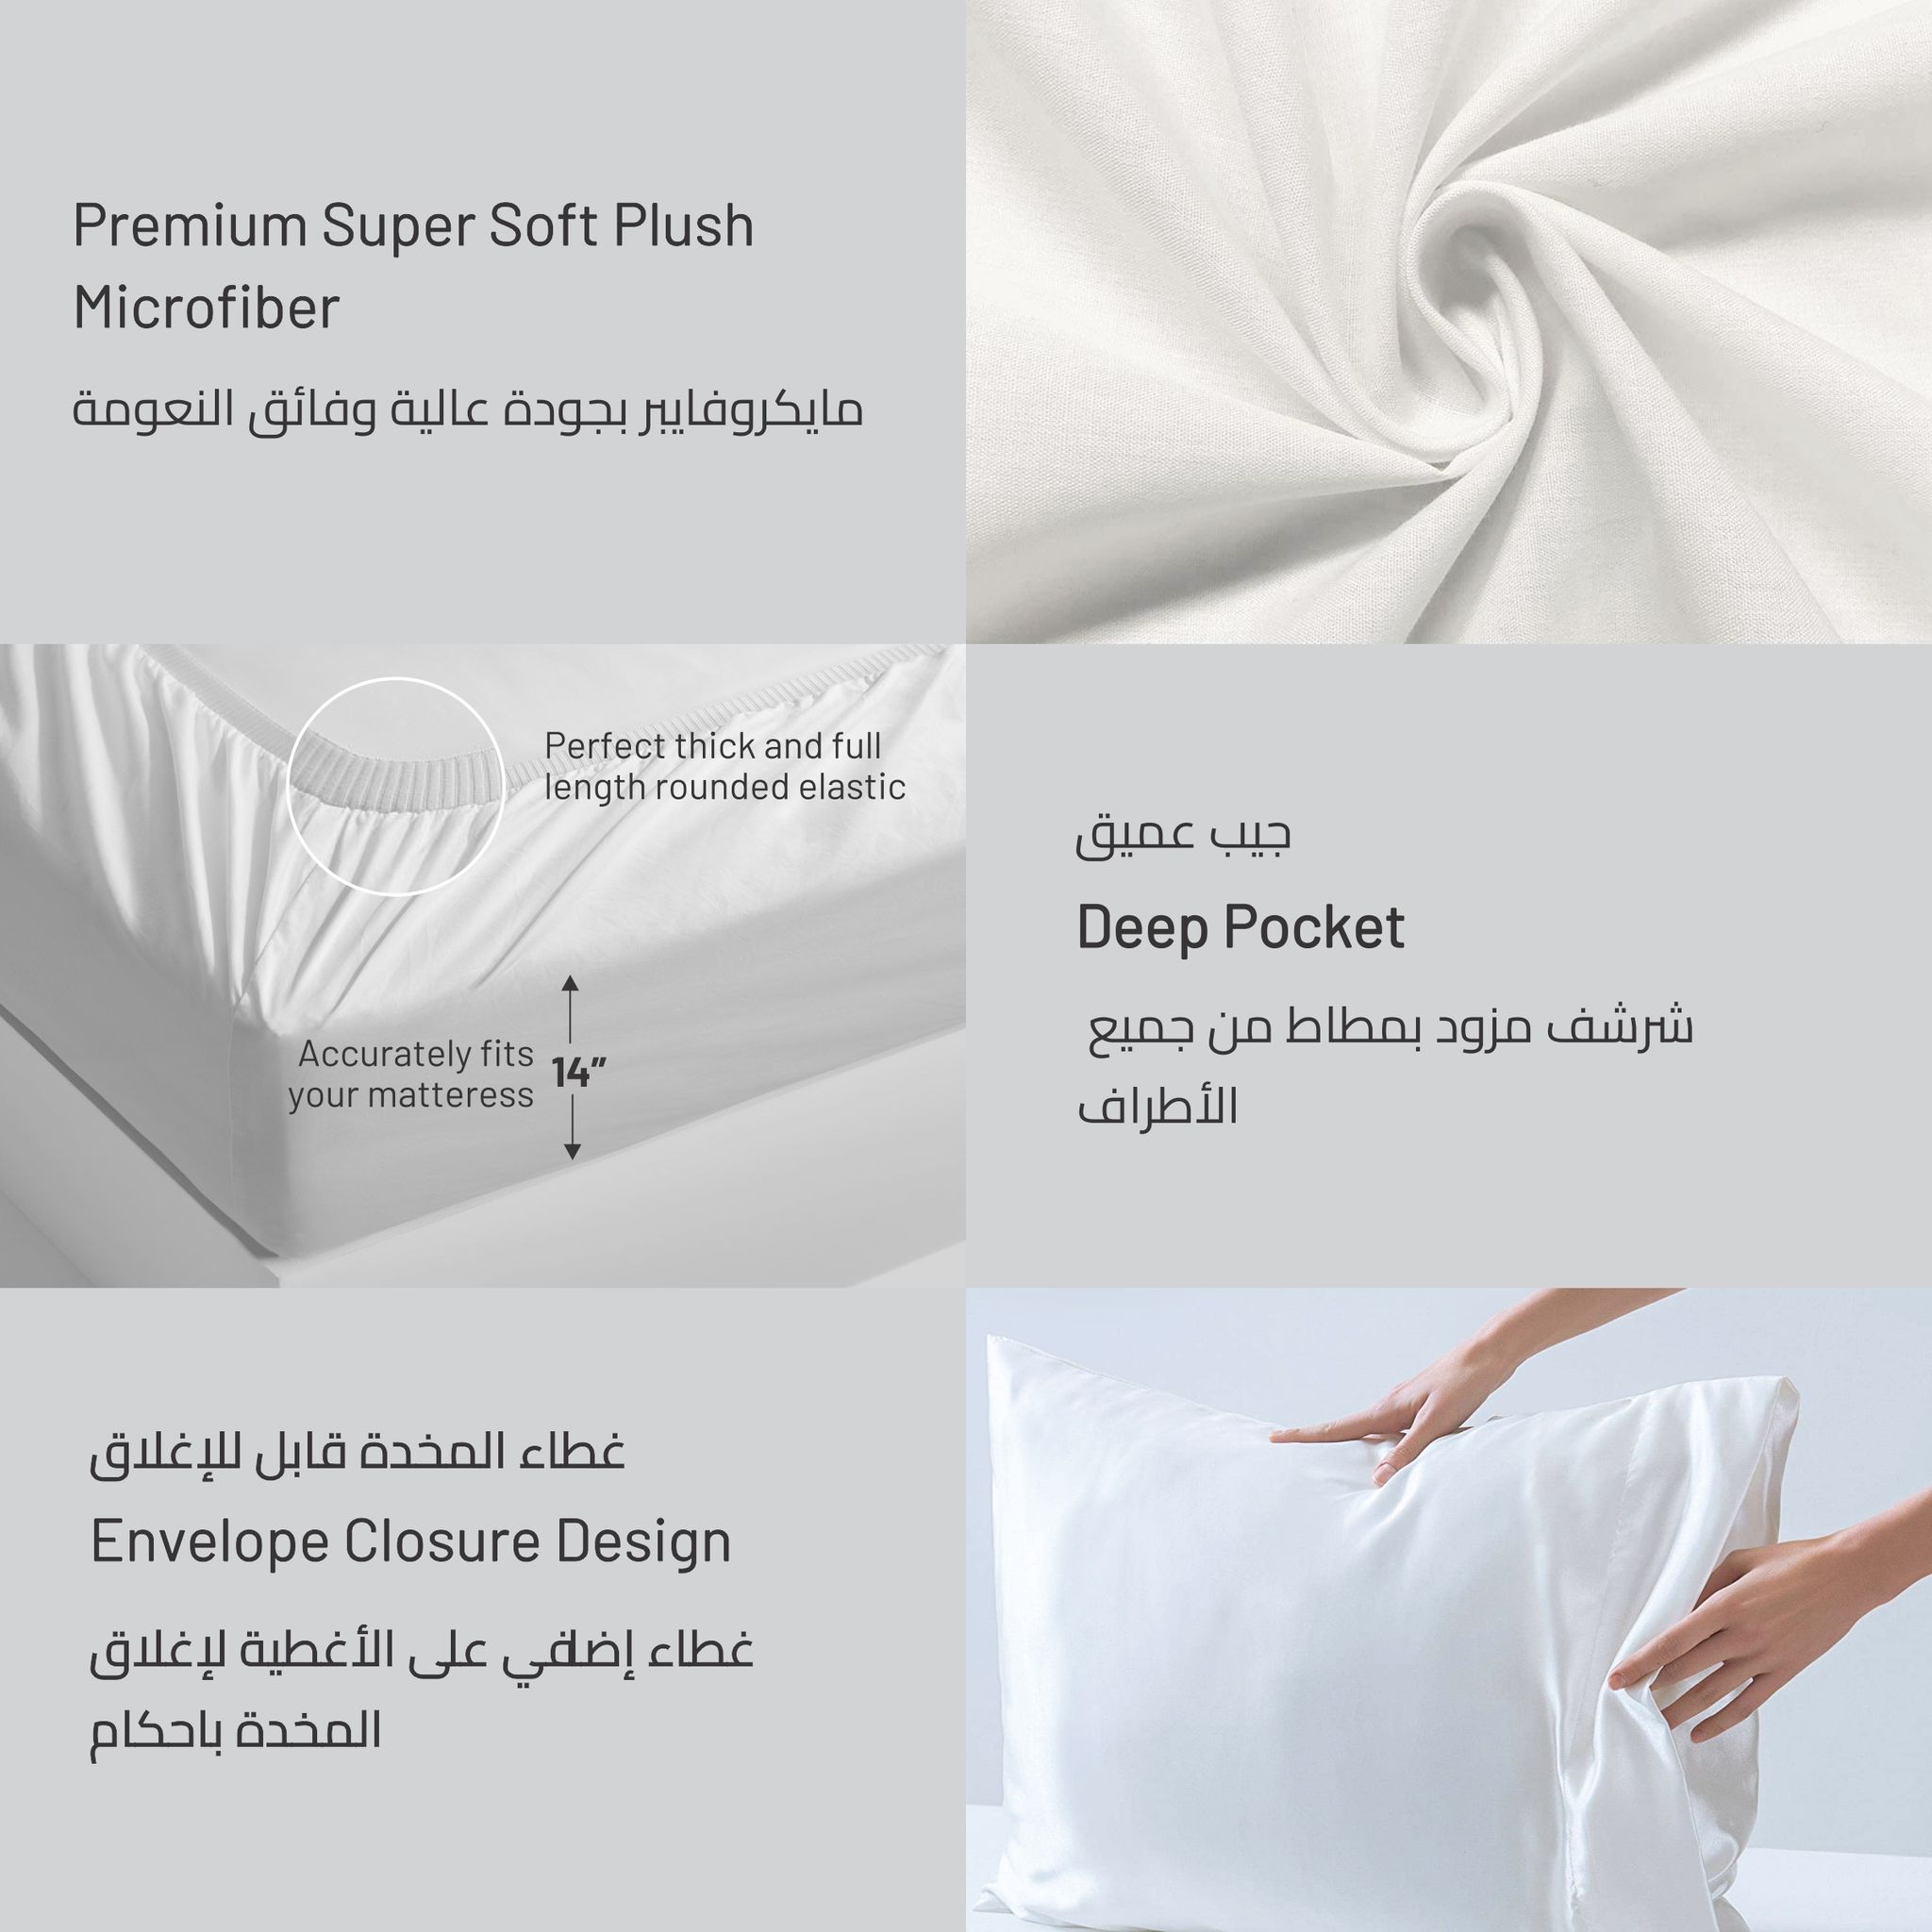 6-Piece Hotel Style Duvet Cover Set Without Filler, Double Size King, Sage